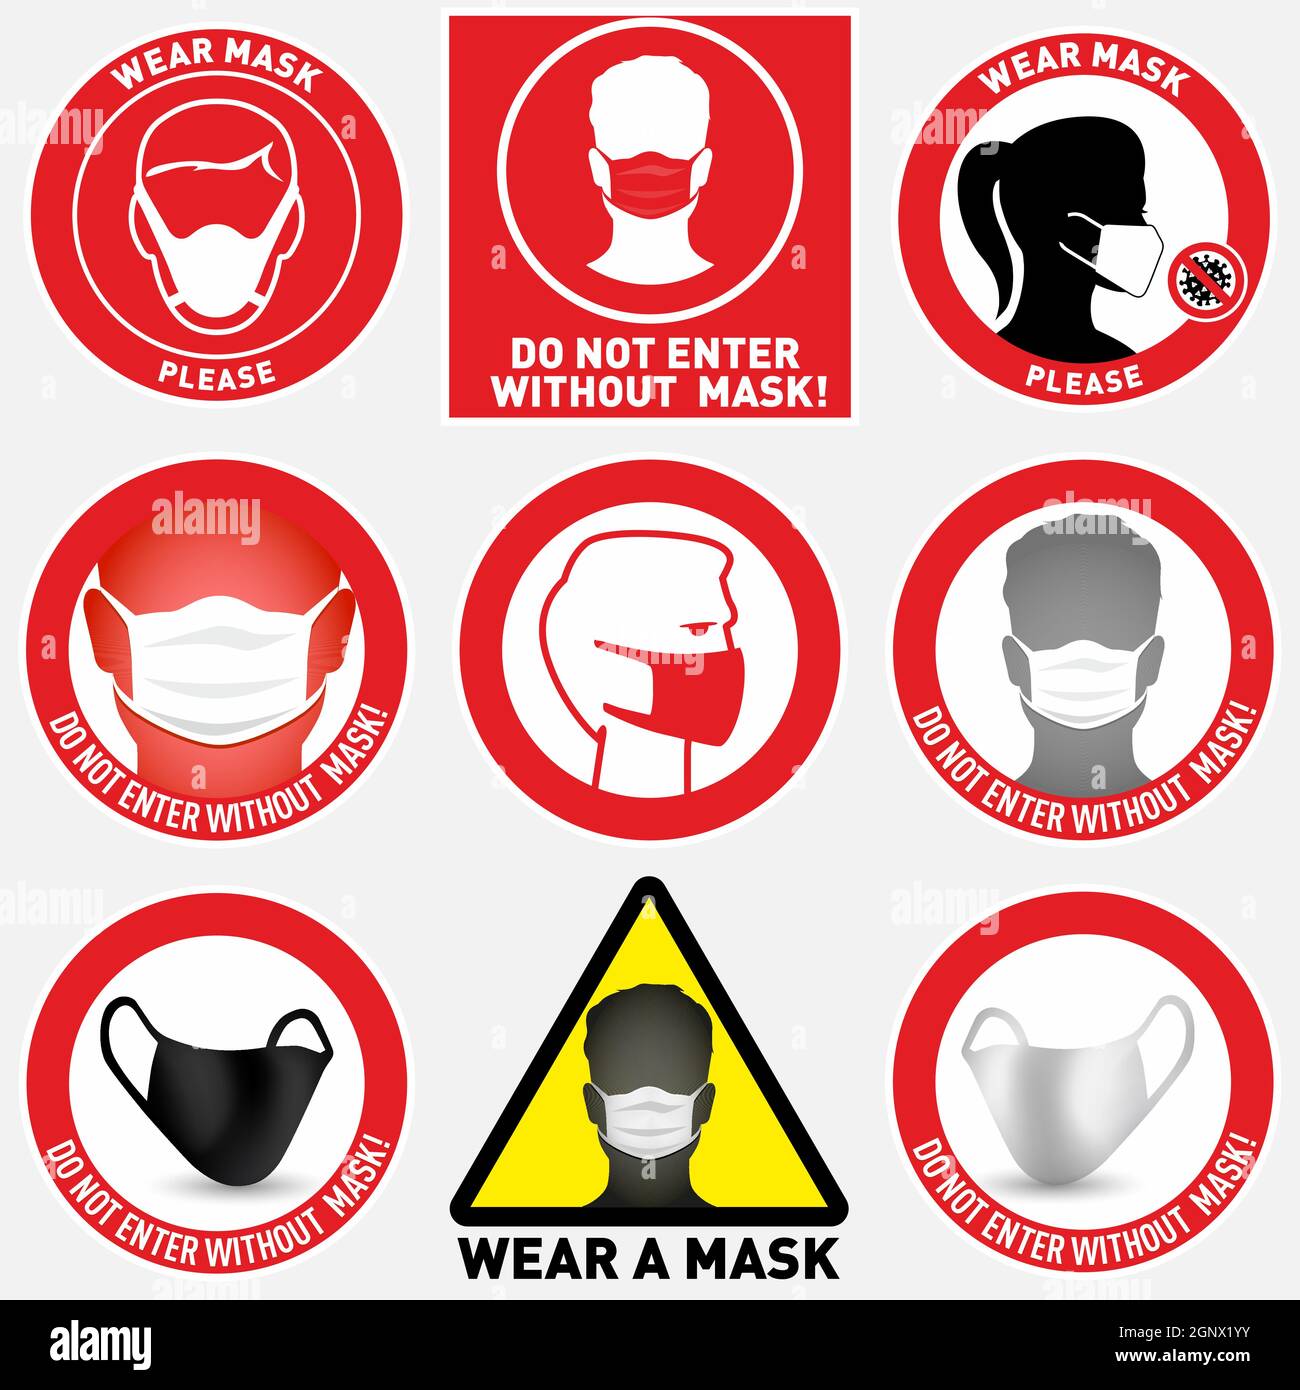 Set of face mask required vector signs. Facemask or covering must be worn in shops or public spaces during coronavirus covid-19 social distancing pandemic. Variety set of vector icons and slogan signs Stock Vector